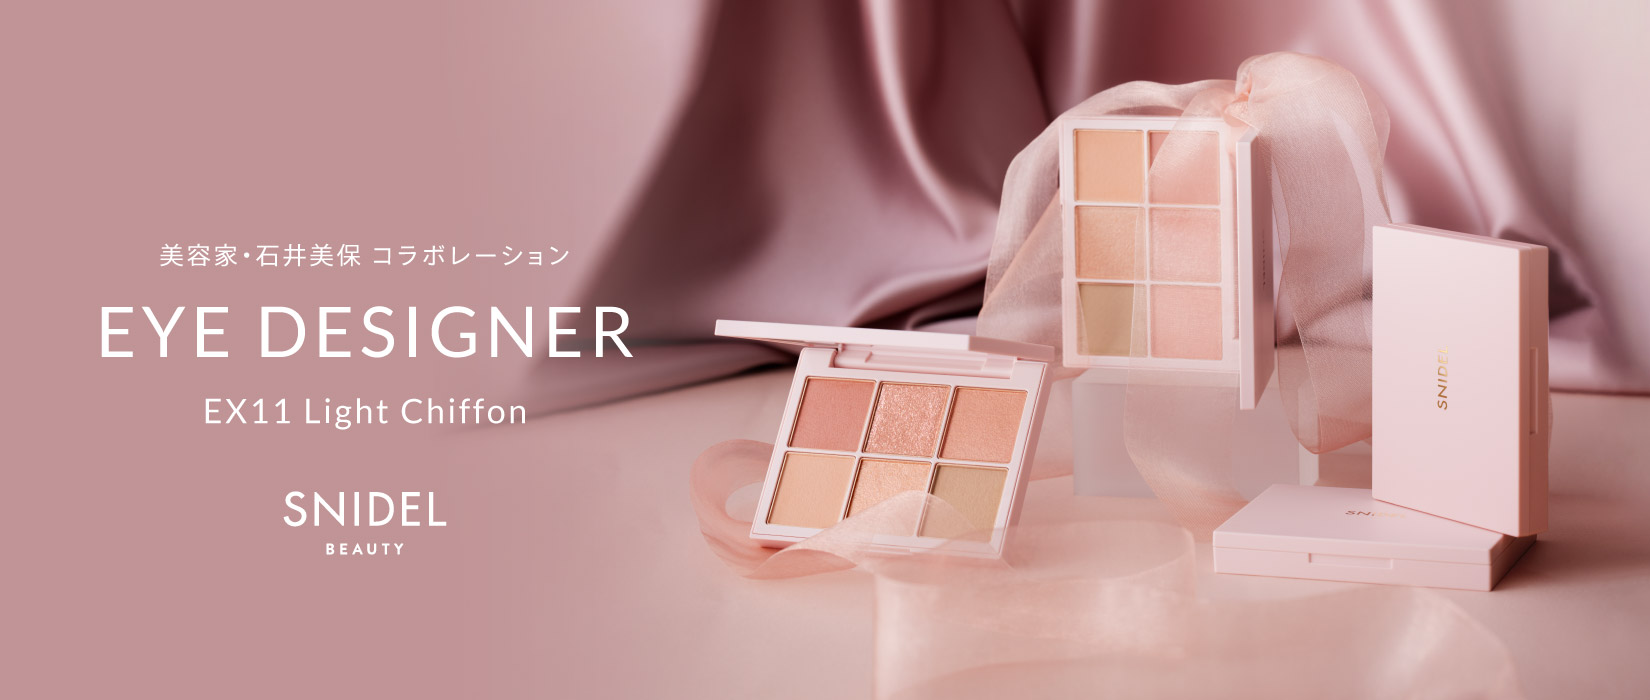 【SNIDEL BEAUTY】Sophisticated Chiffon   Miho Ishii Special Collaboration